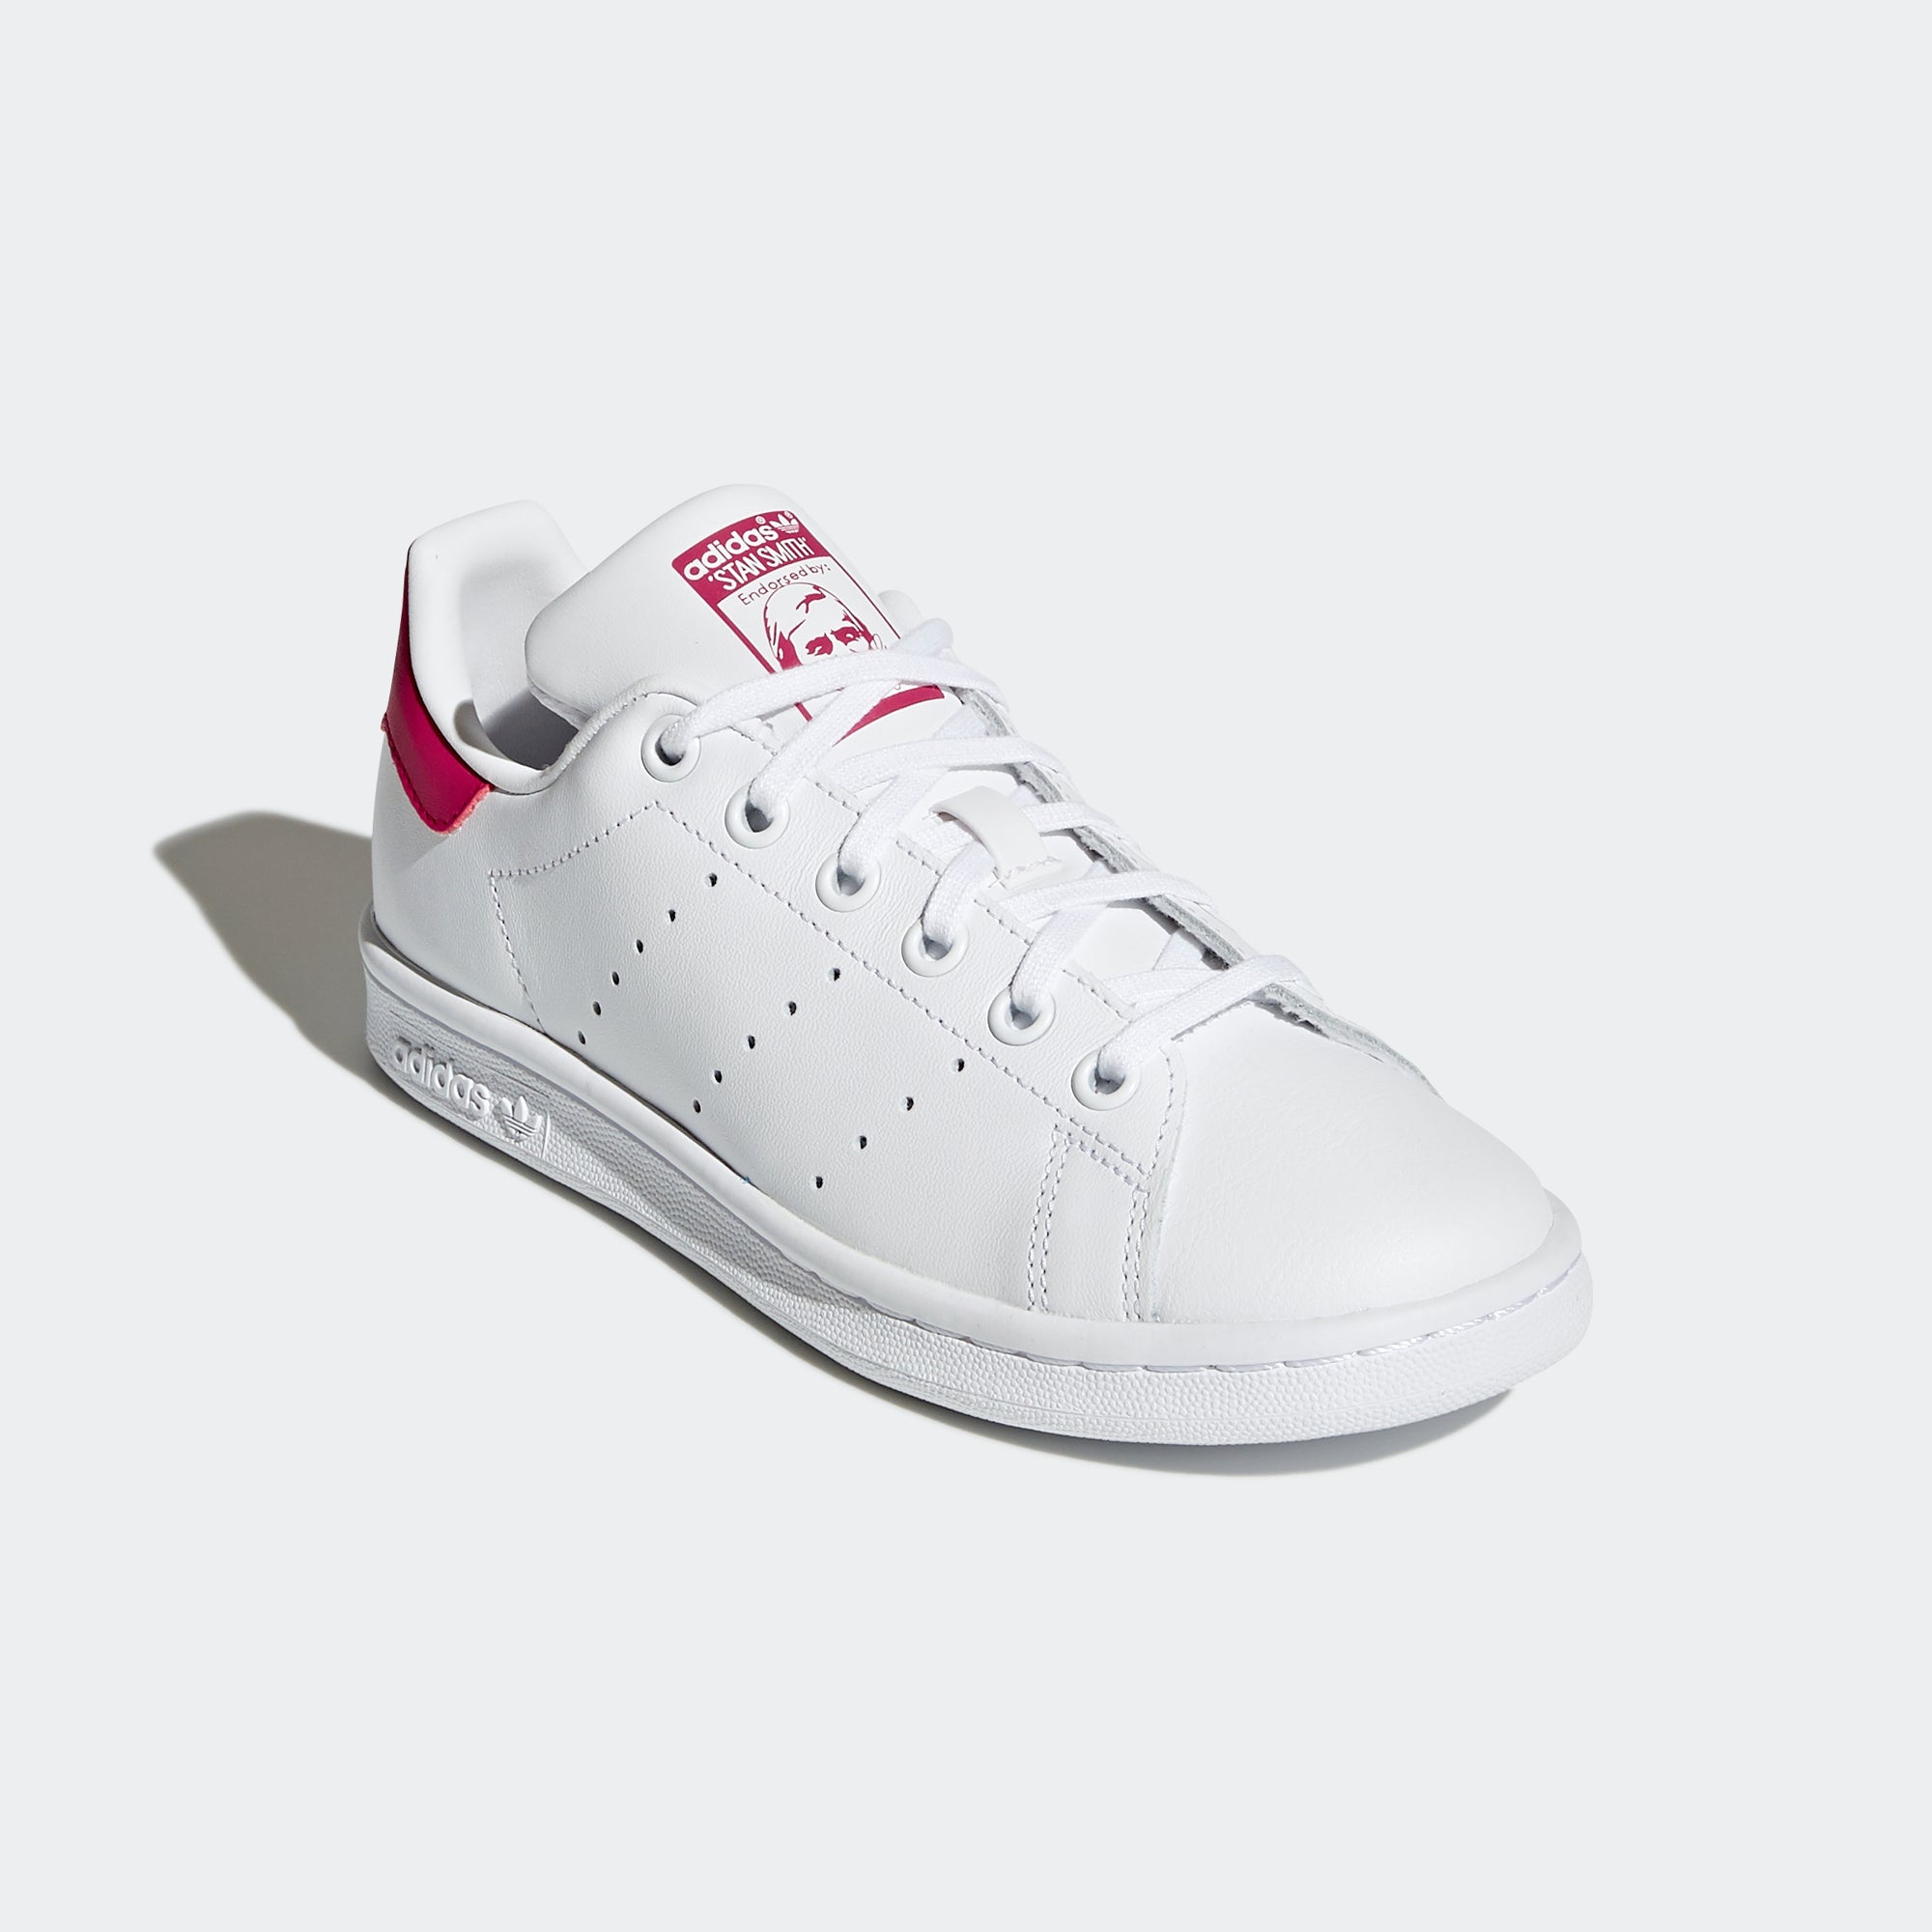 City | Smith Chicago Pink Sports Bold B32703 Stan Shoes White adidas